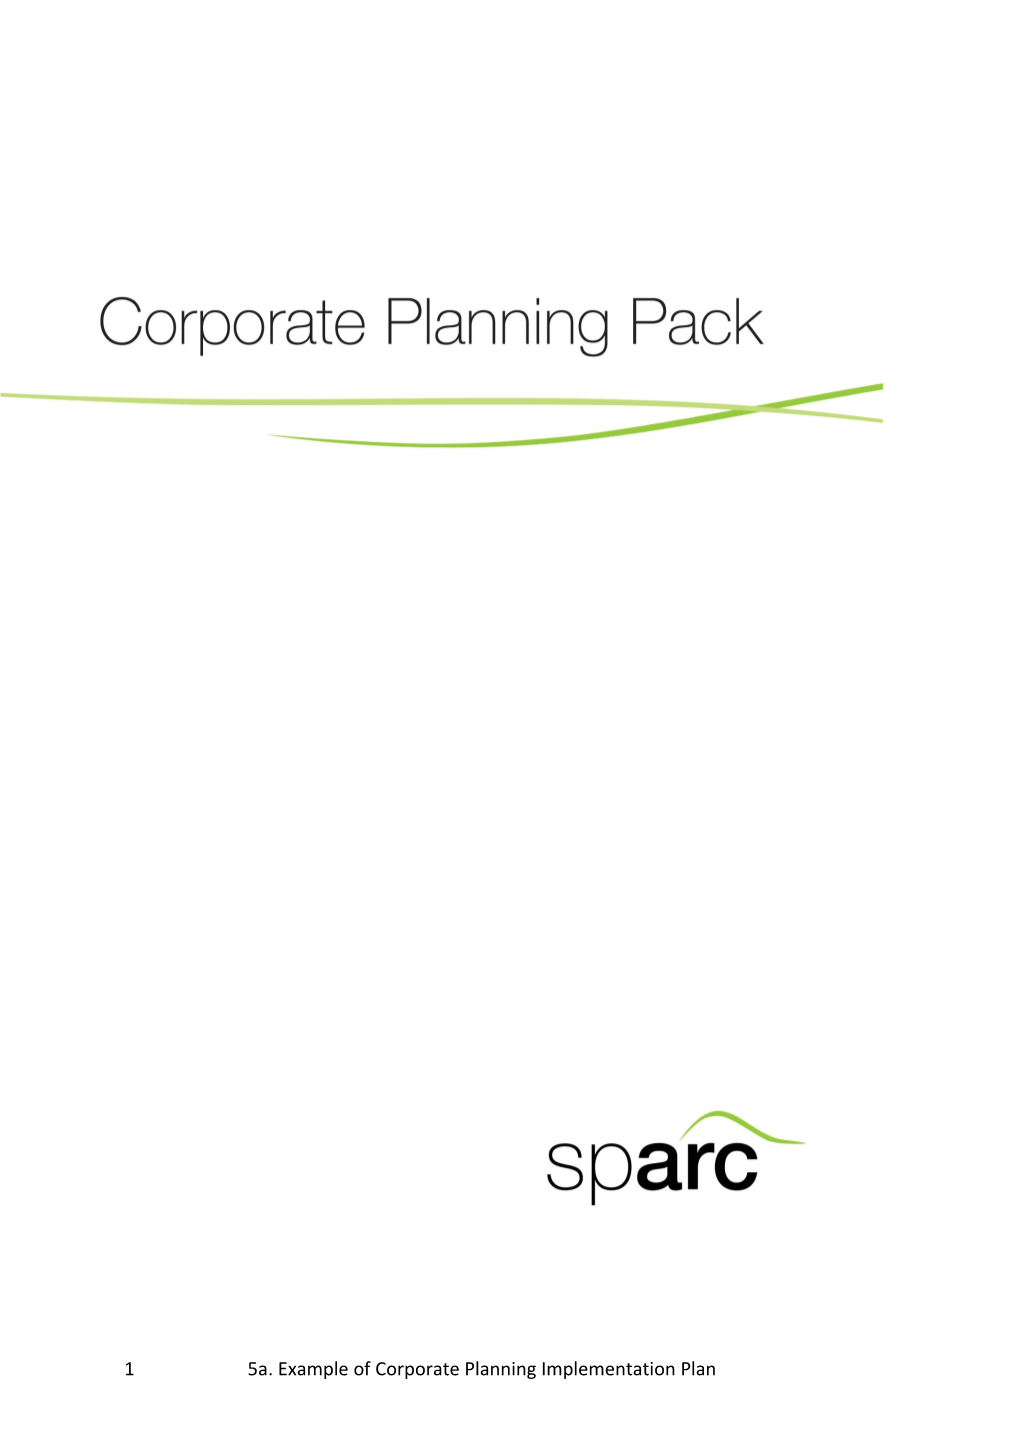 5Aexample of Corporate Planning Implementation Plan